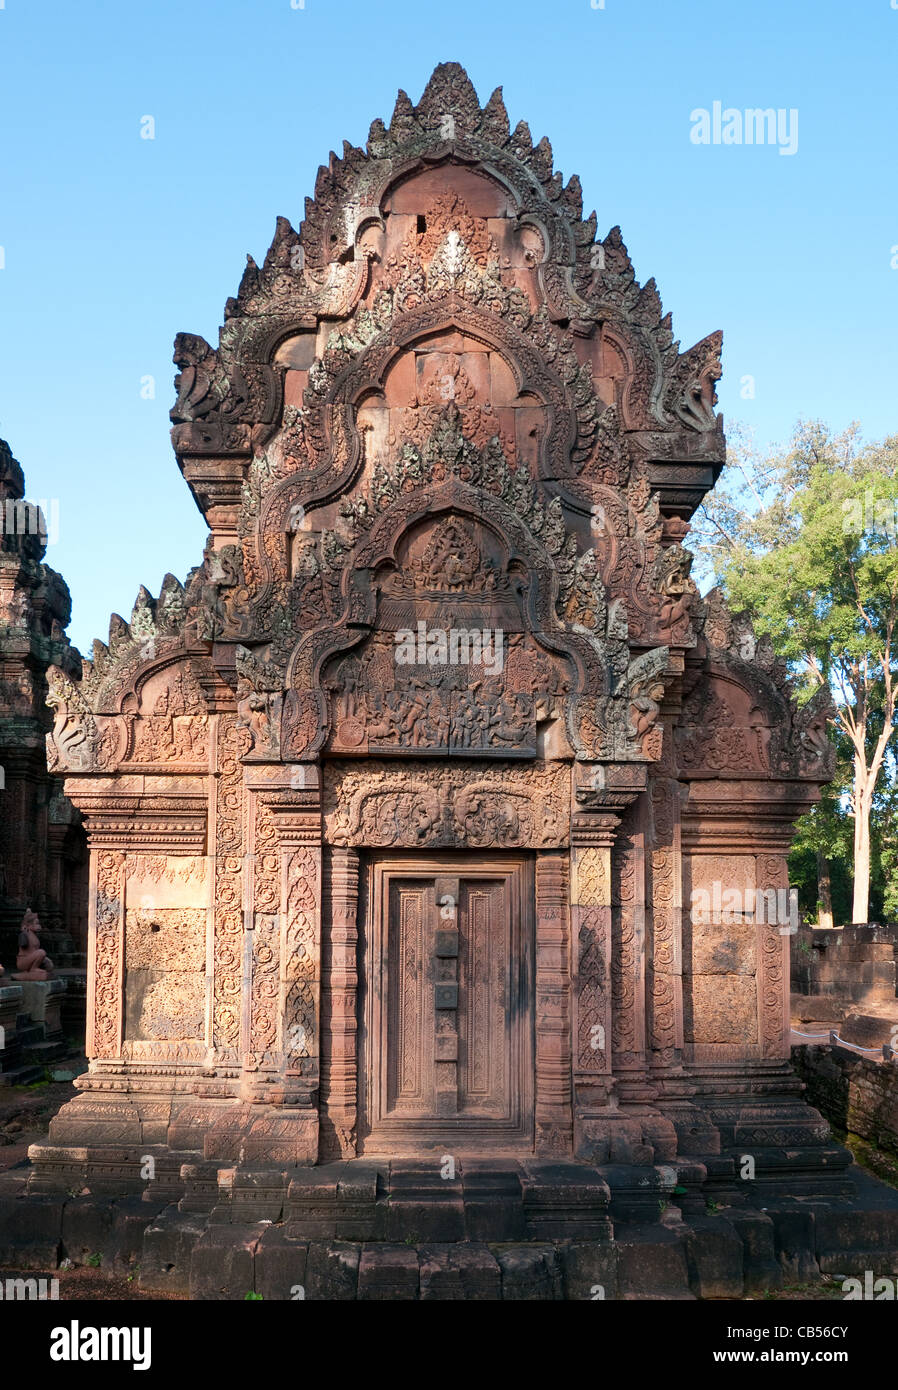 Building at the Banteay Srey Temple in Siem Reap, Cambodia Stock Photo